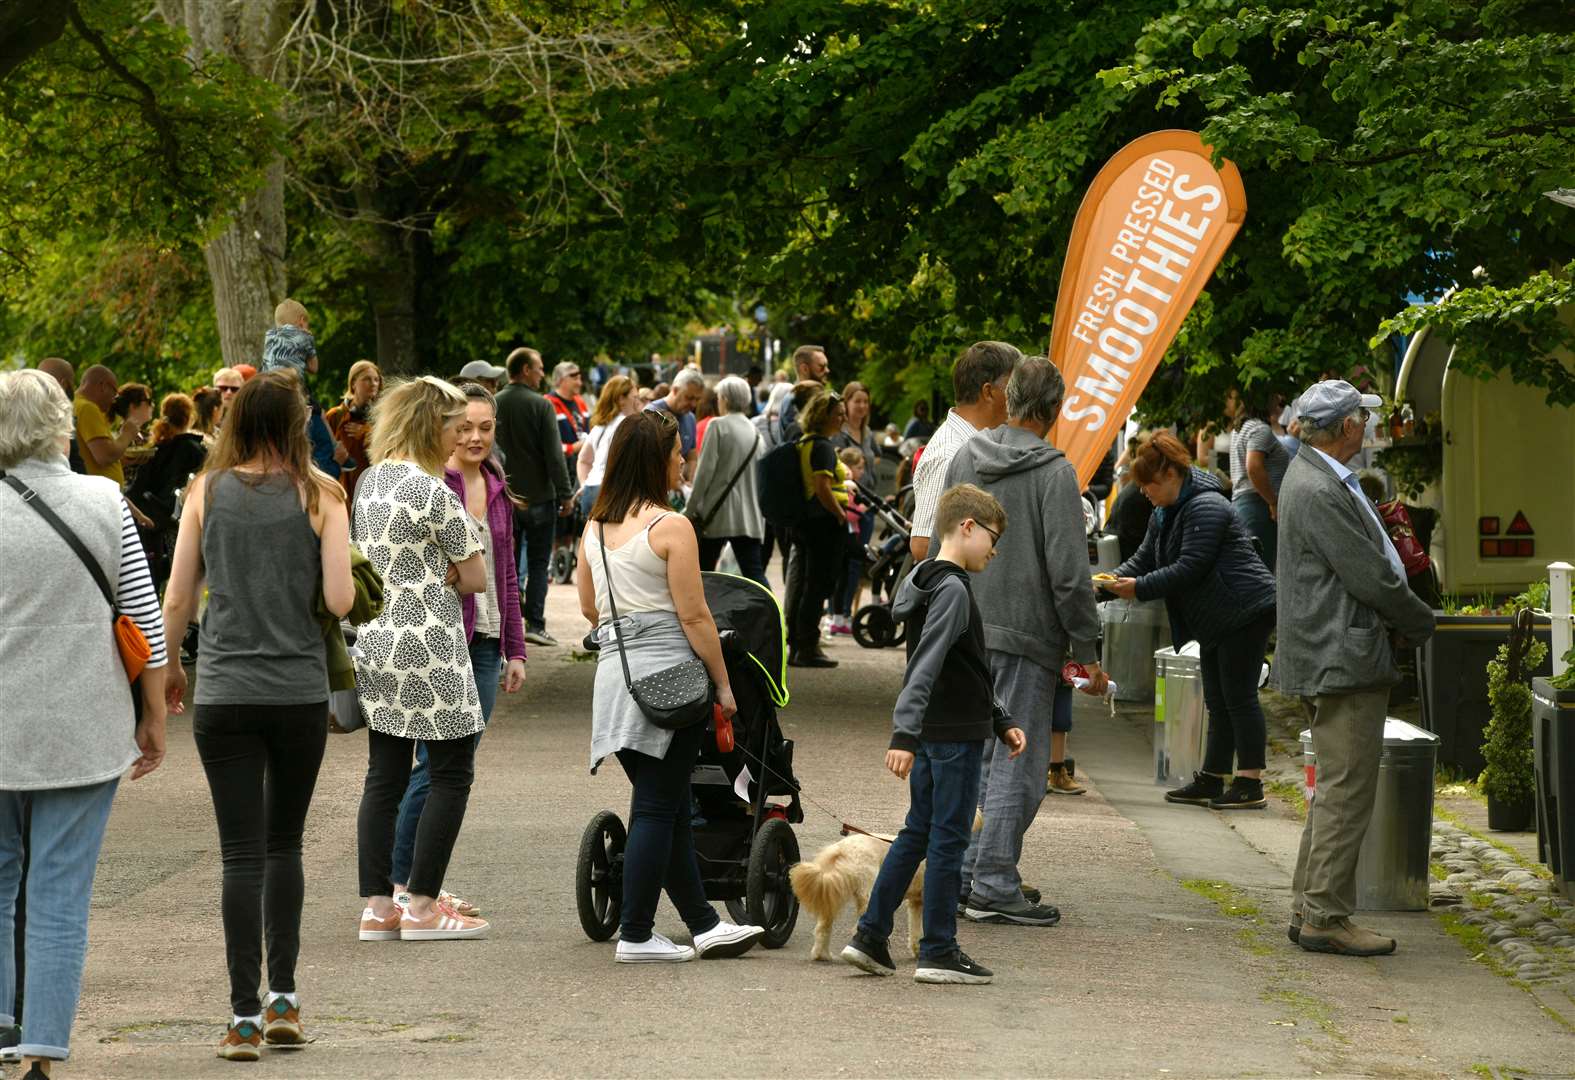 The Highland Food and Drink Trail on Ness Walk in Inverness pulls in the crowds.